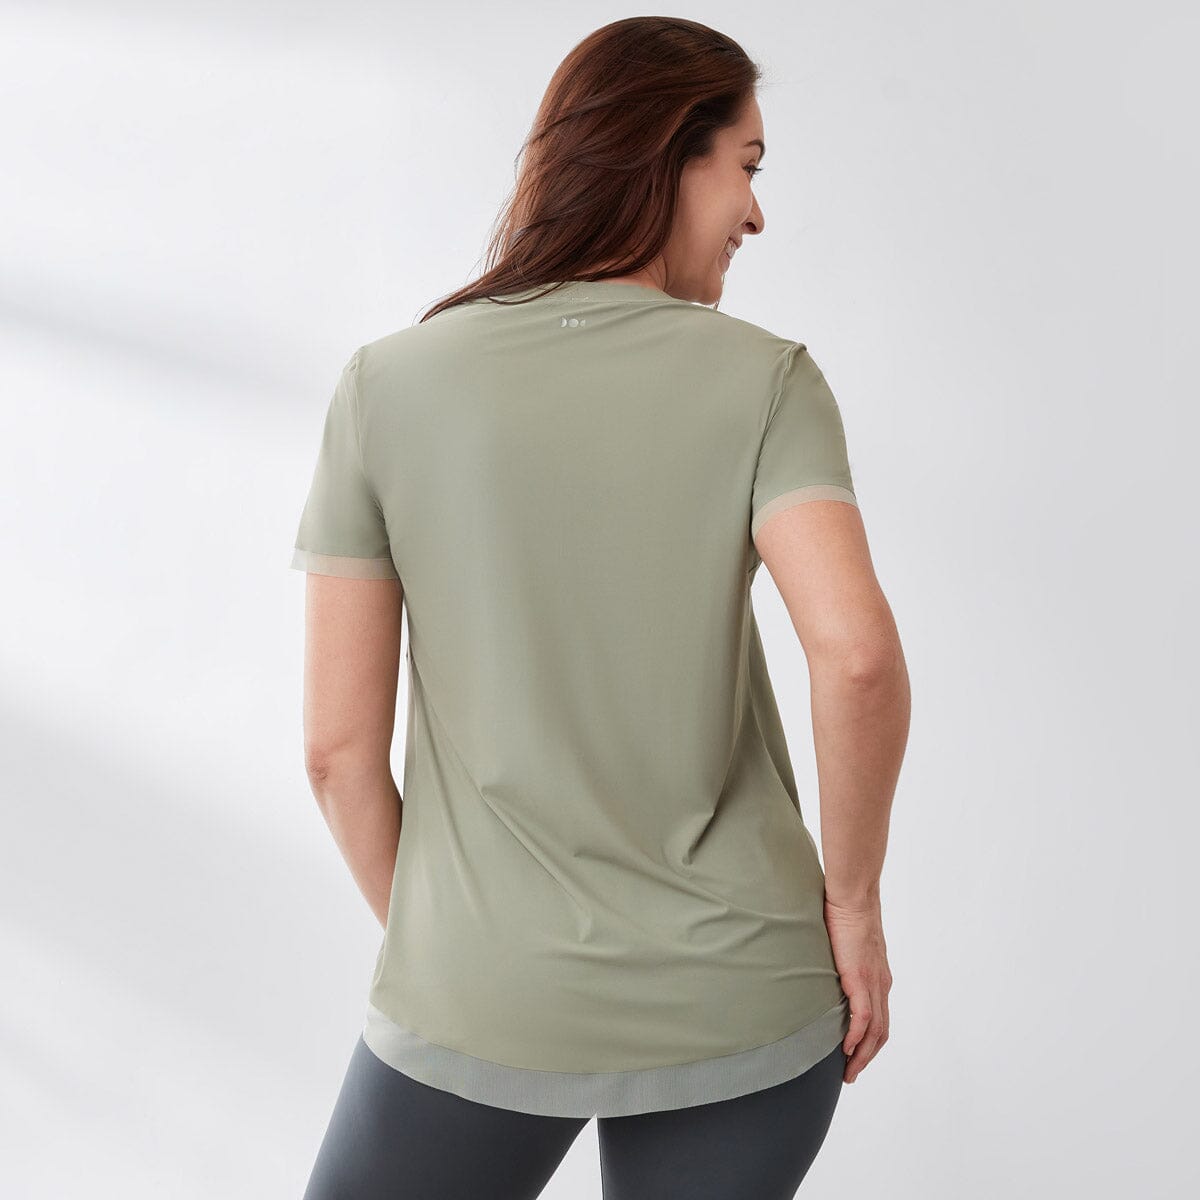 Float Lightweight UV Protection Cool Touch Short Sleeve Tee Tops Her own words SPORTS 